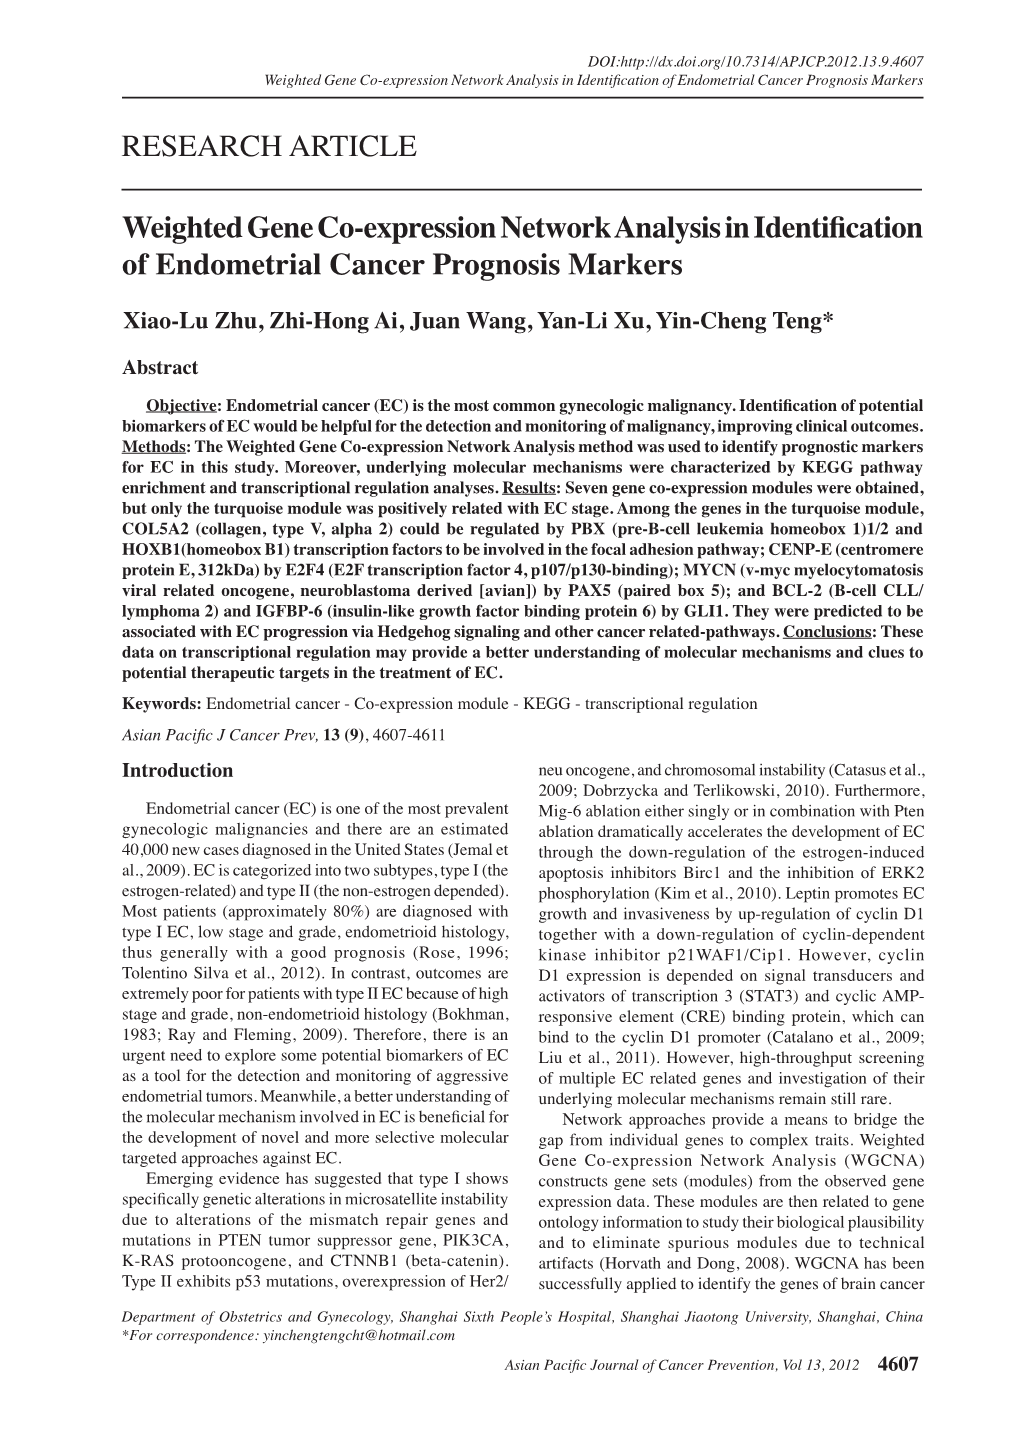 Weighted Gene Co-Expression Network Analysis in Identification of Endometrial Cancer Prognosis Markers